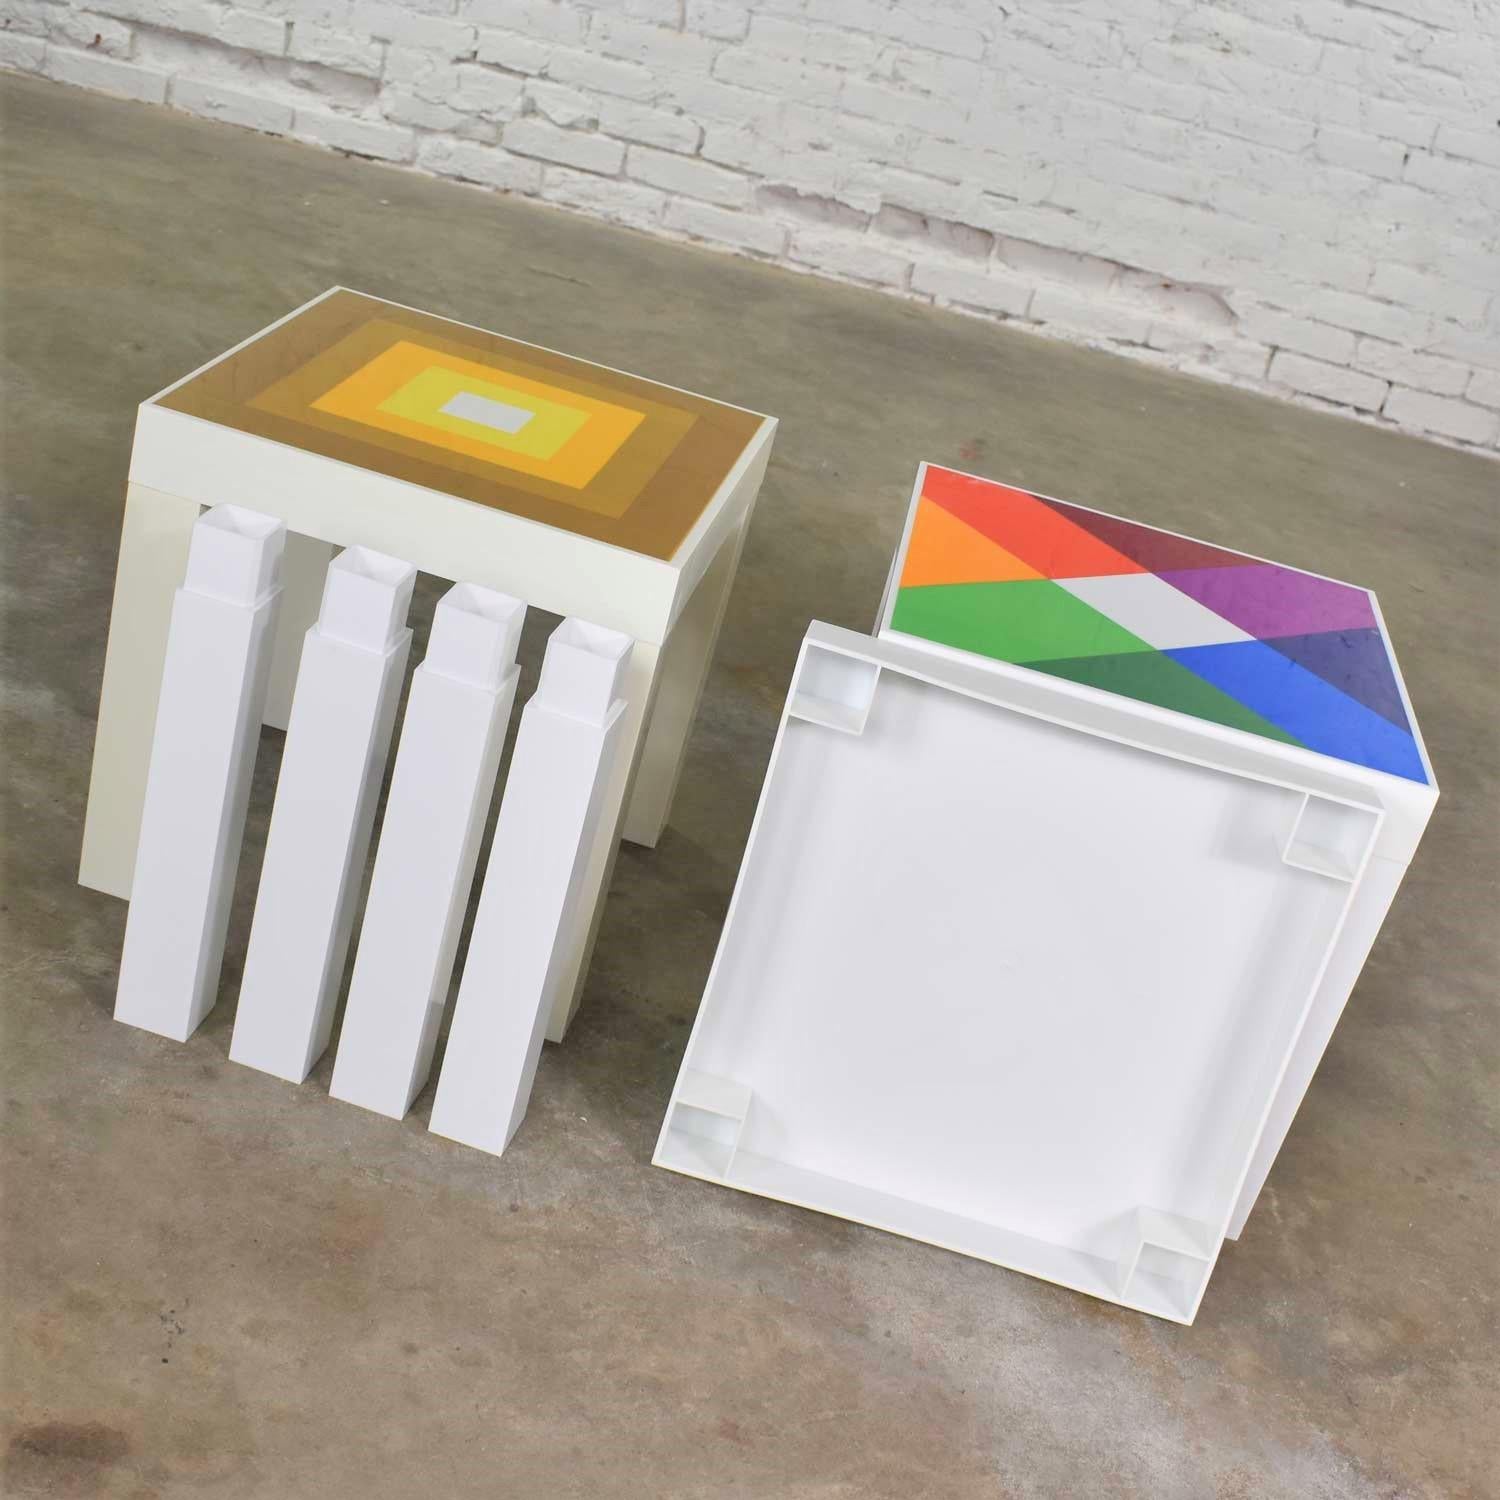 Trio Mod Pop Art Plastic Parsons Style Square Side Tables Style Kartell or Syroc For Sale 8